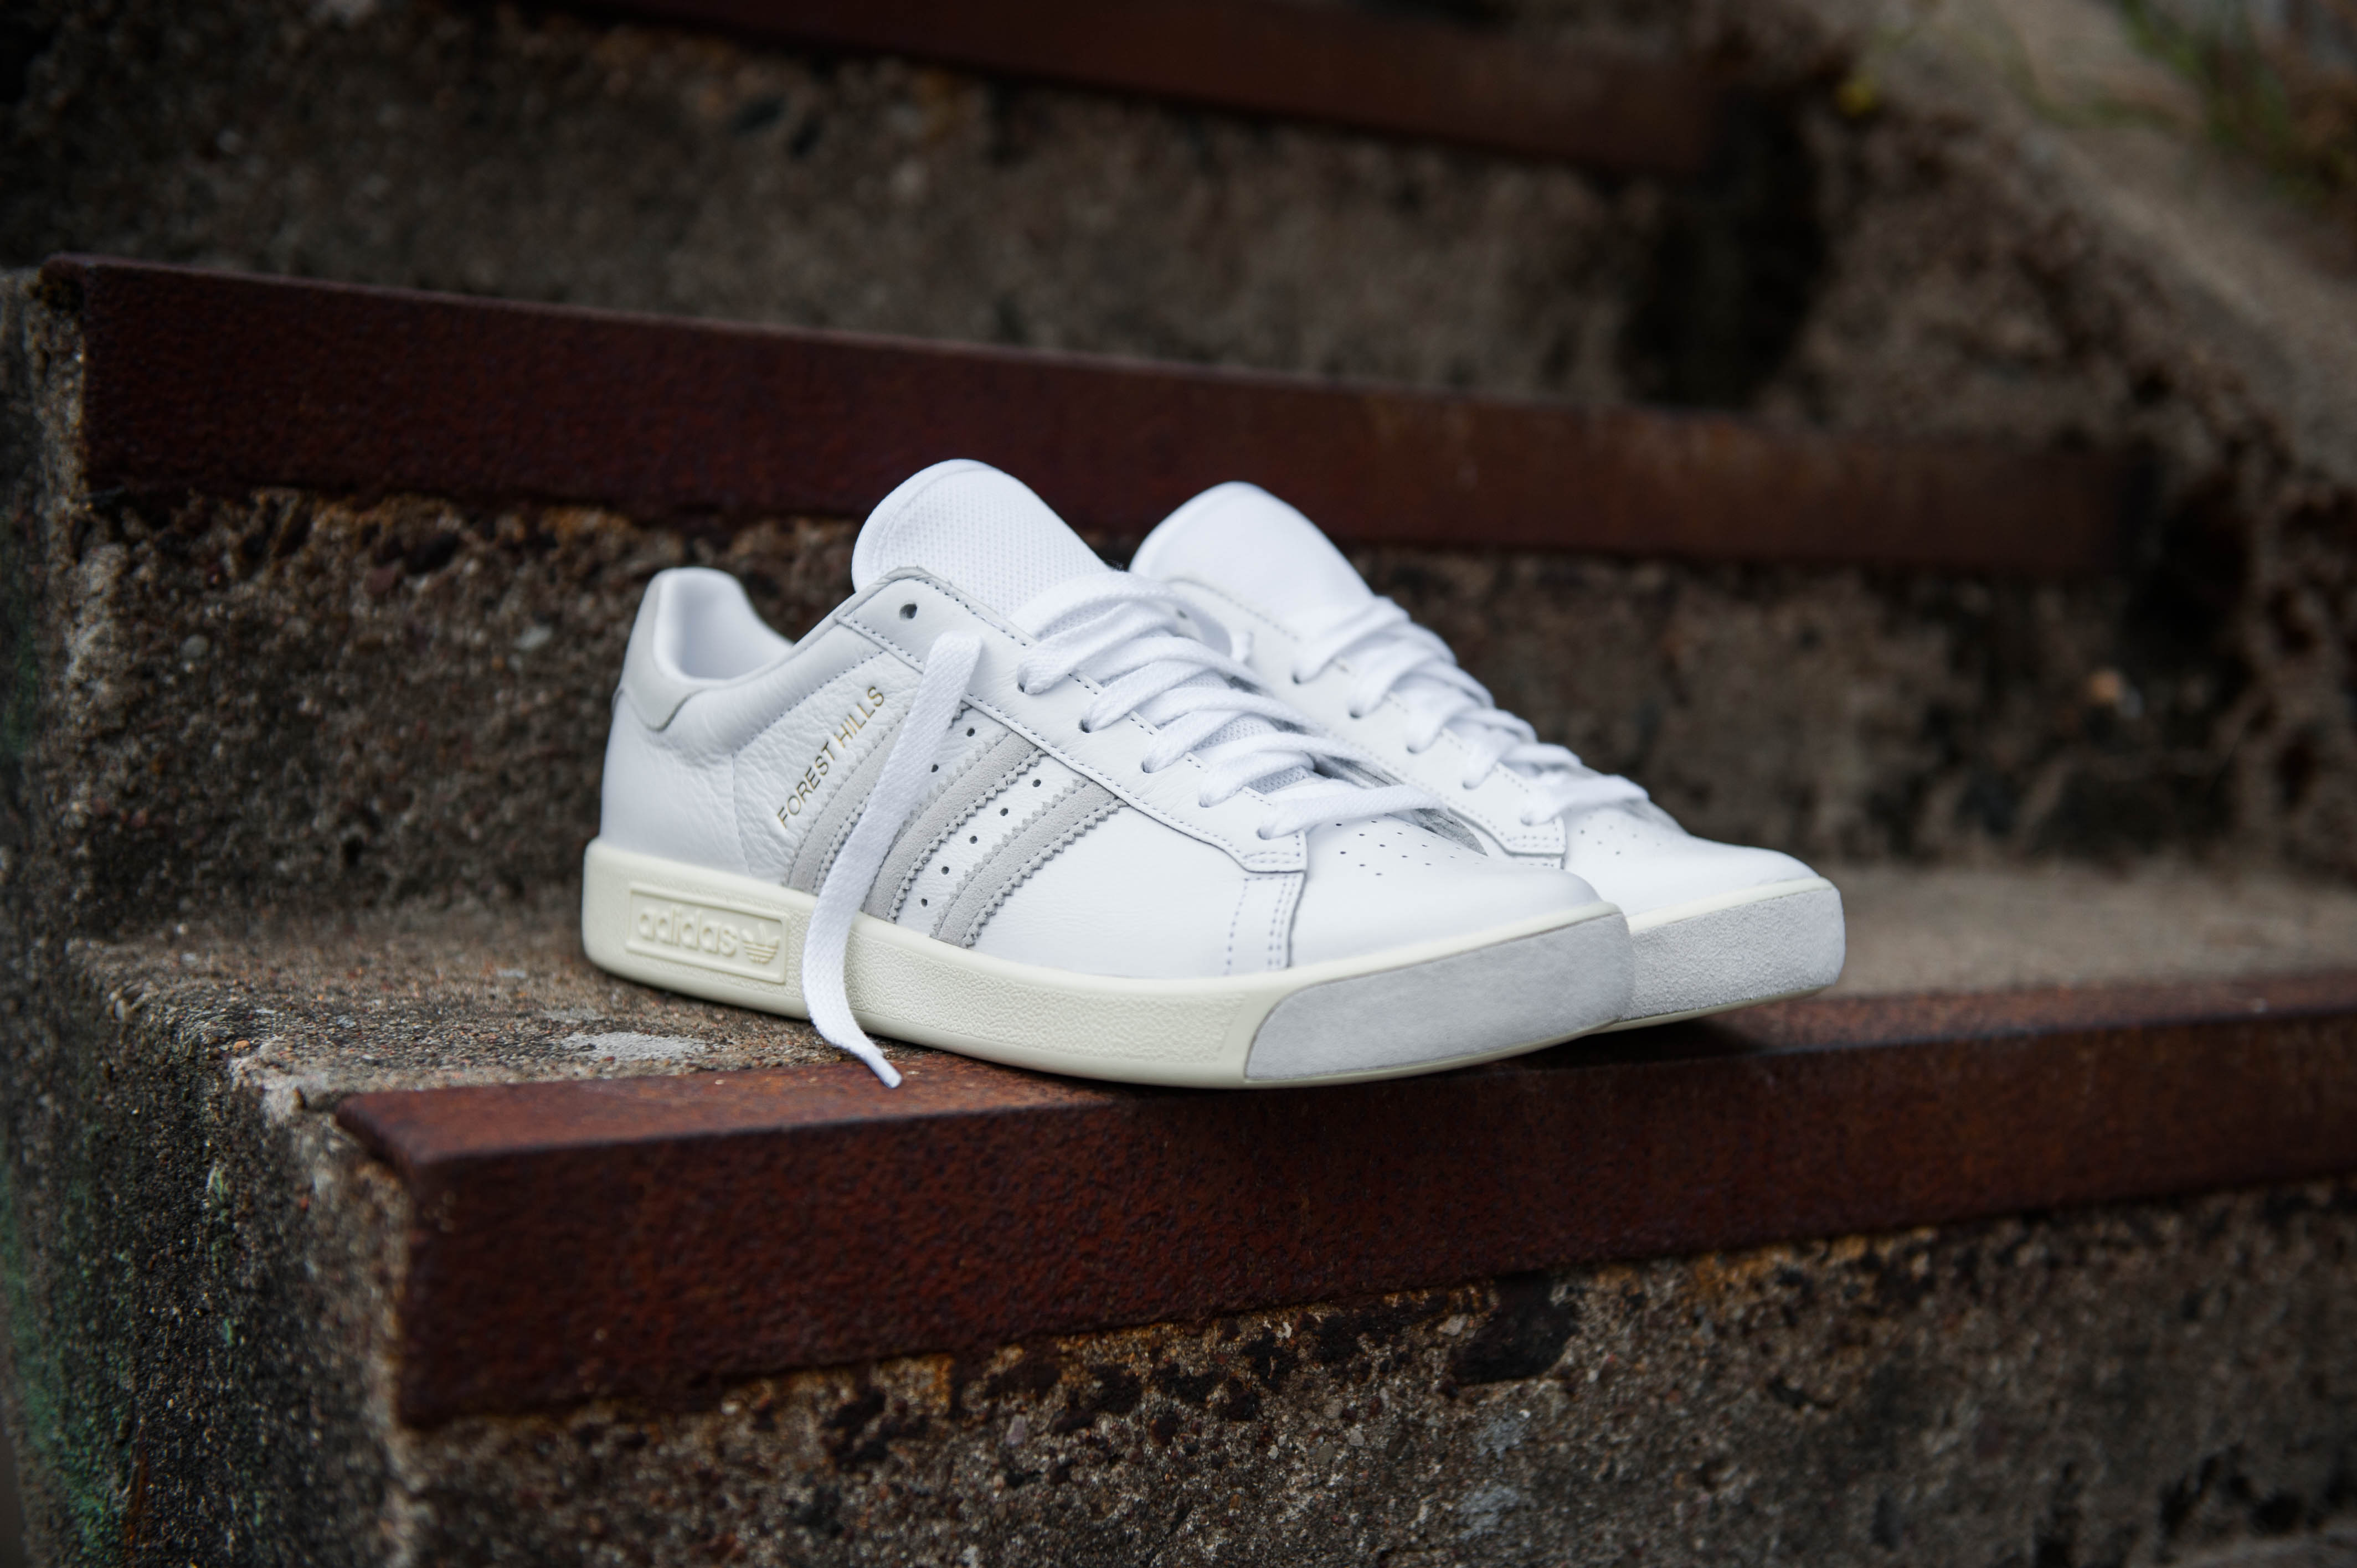 adidas forest hill white